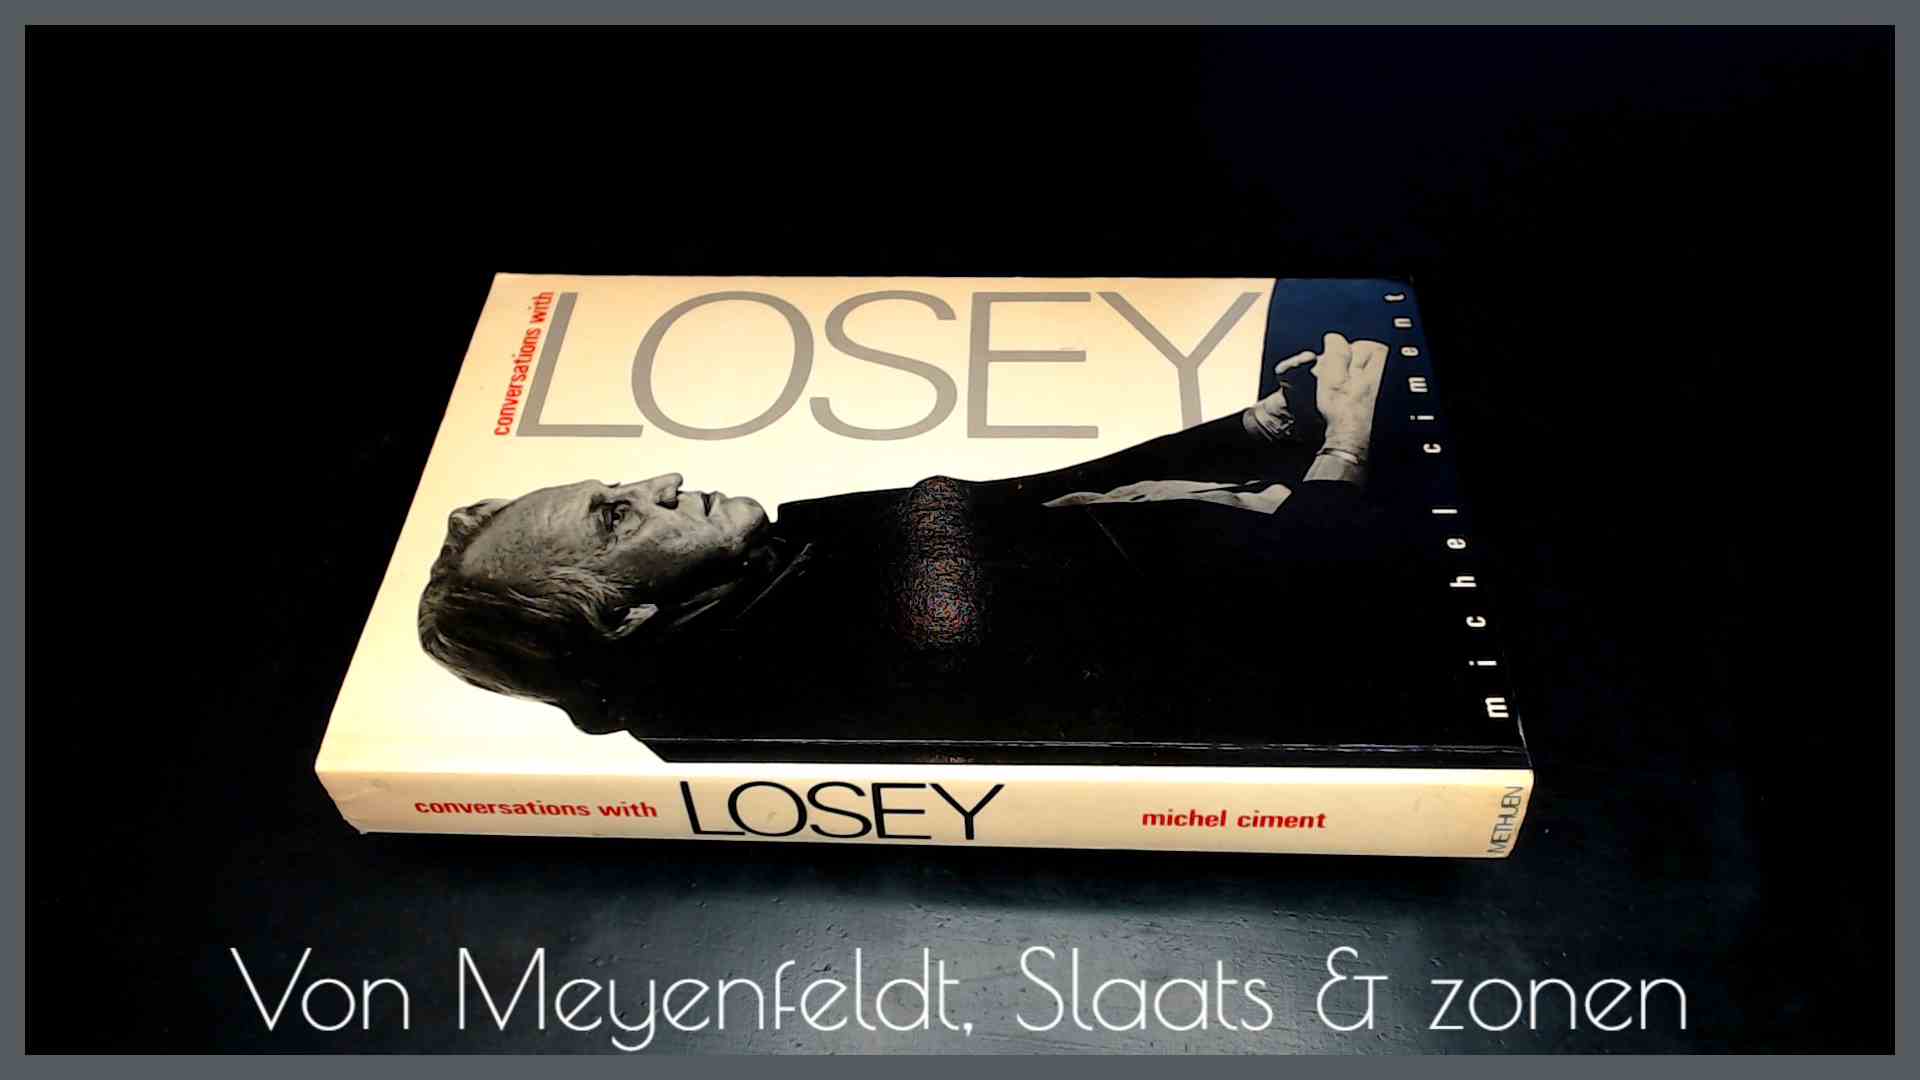 CIMENT, MICHEL - Conversations with Losey